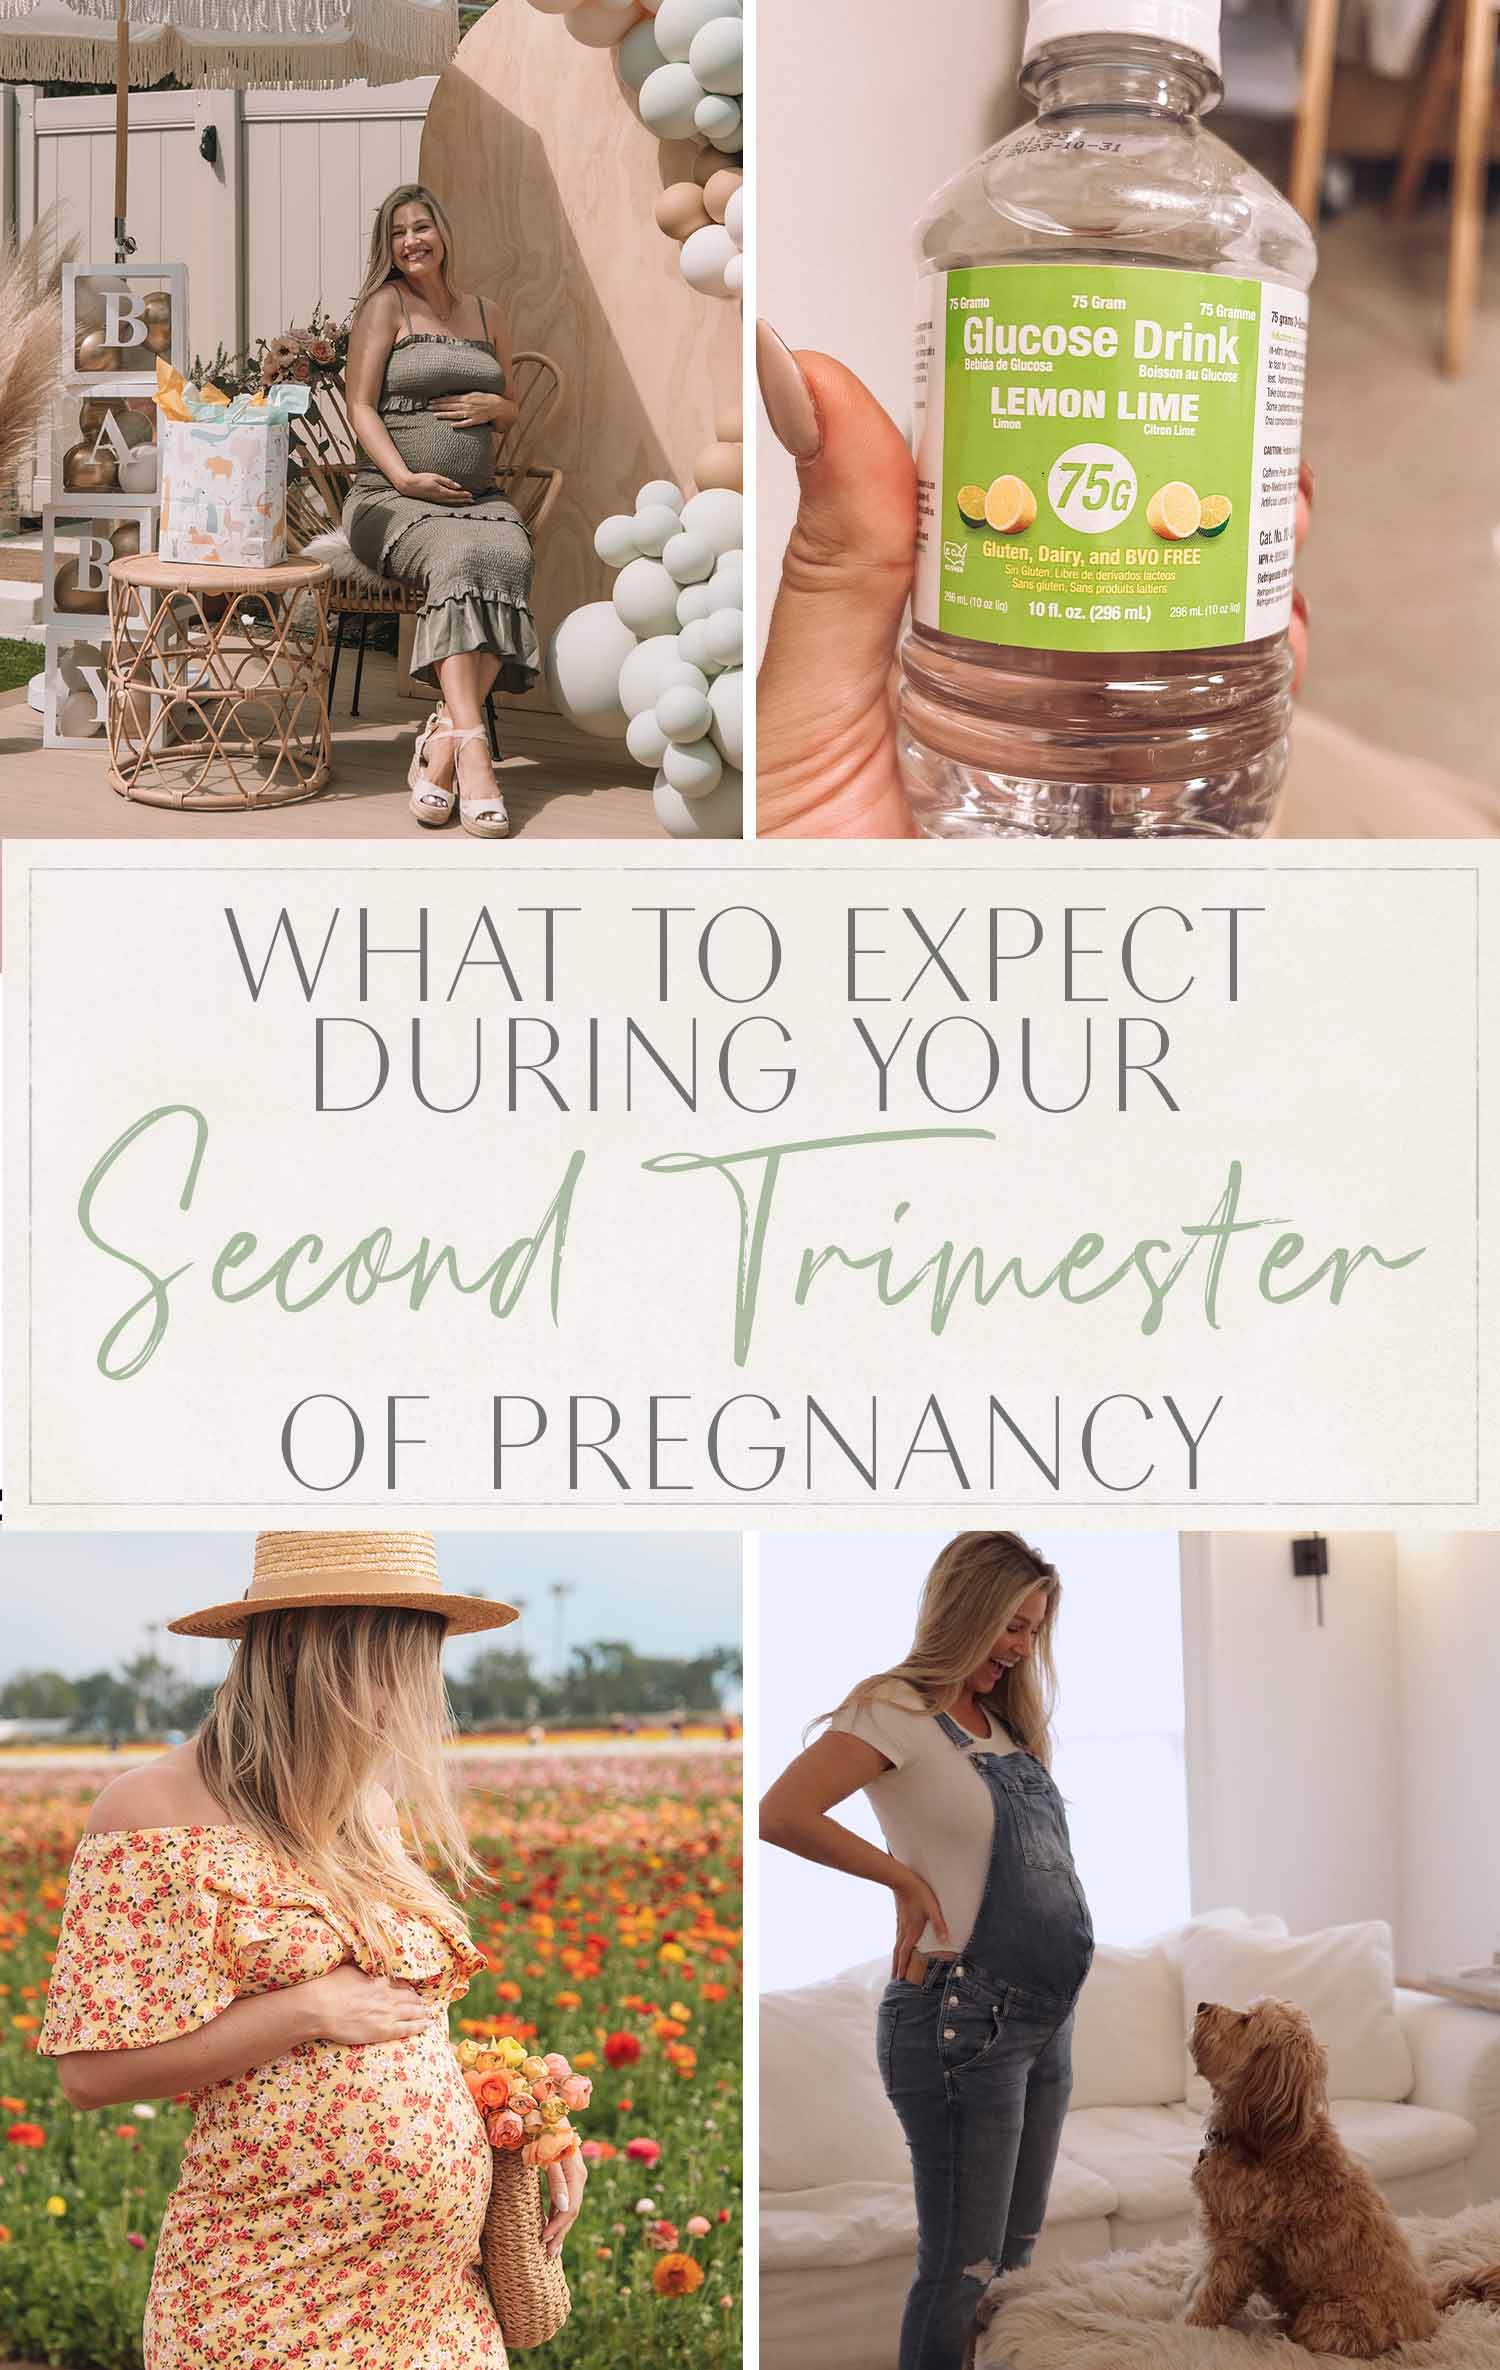 Your Second Trimester of Pregnancy